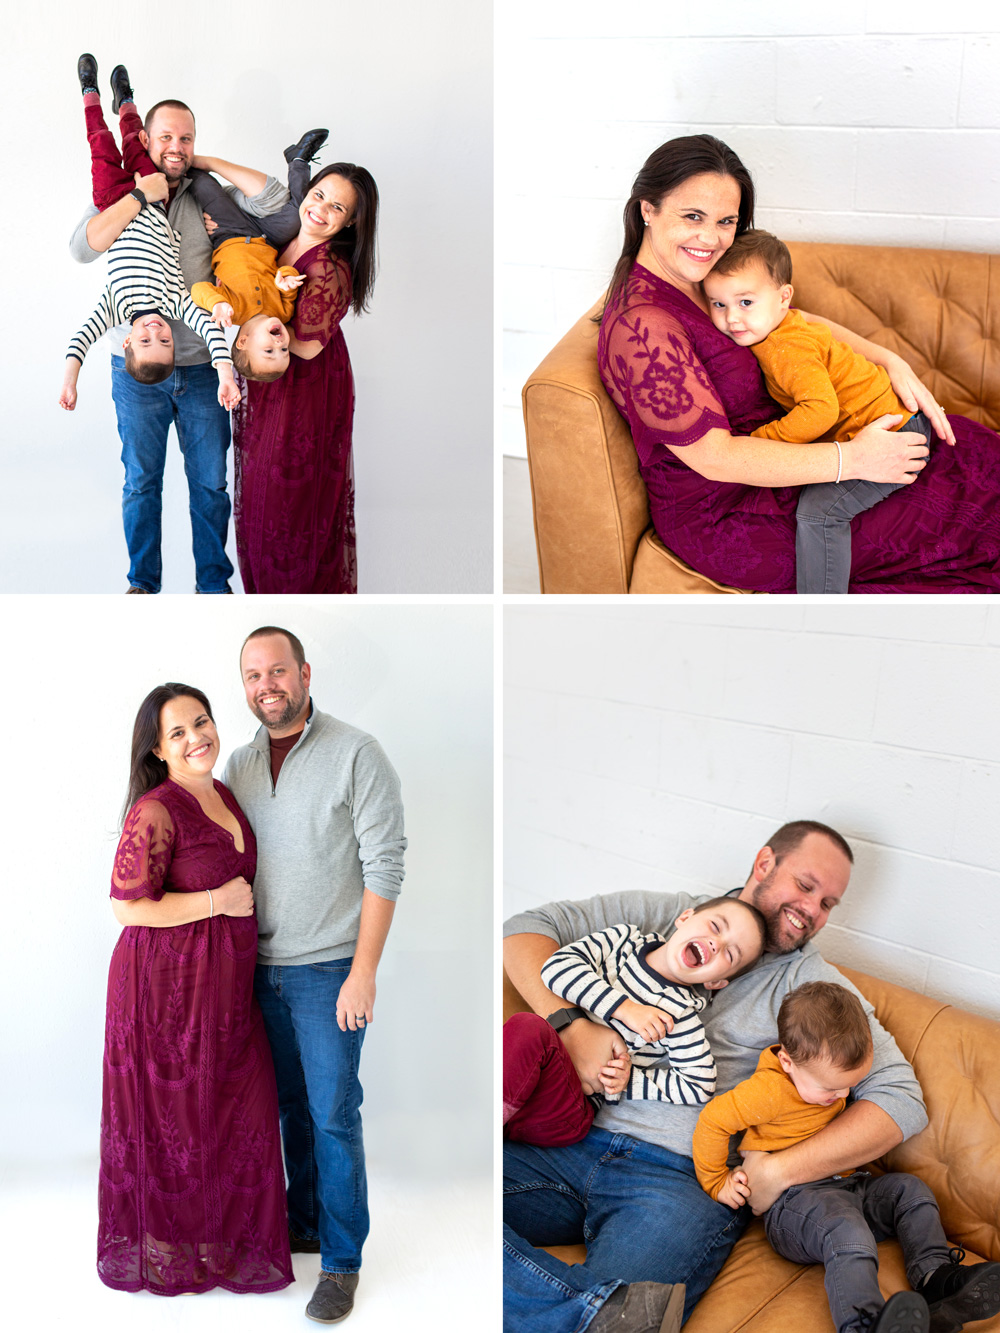 Specializing as a Dallas Baby Photographer